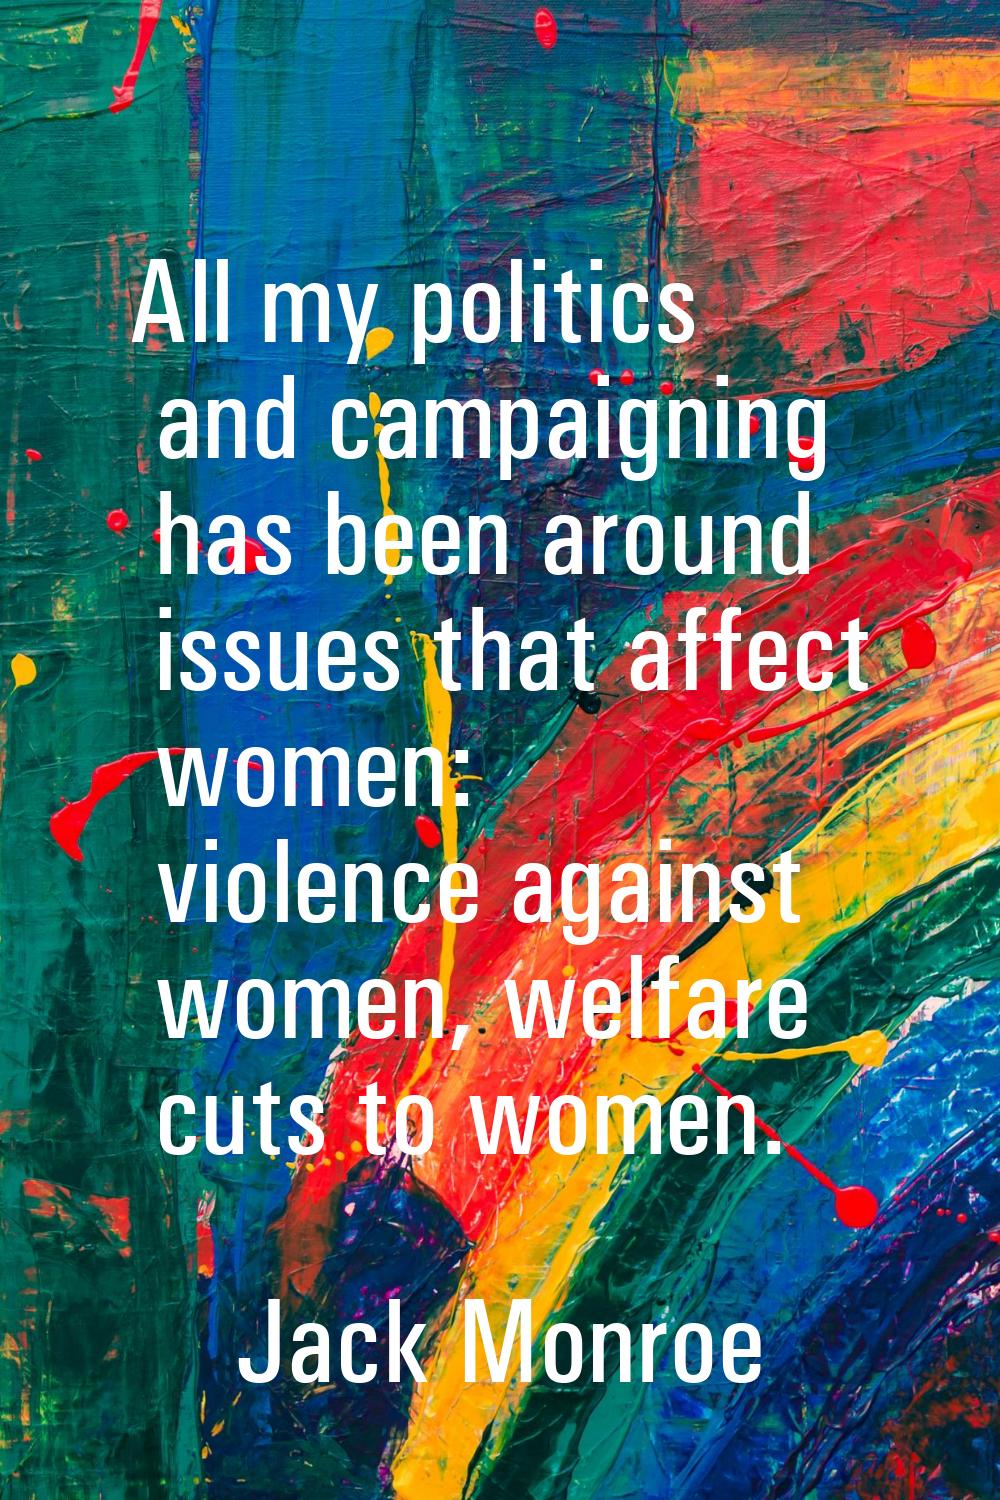 All my politics and campaigning has been around issues that affect women: violence against women, w